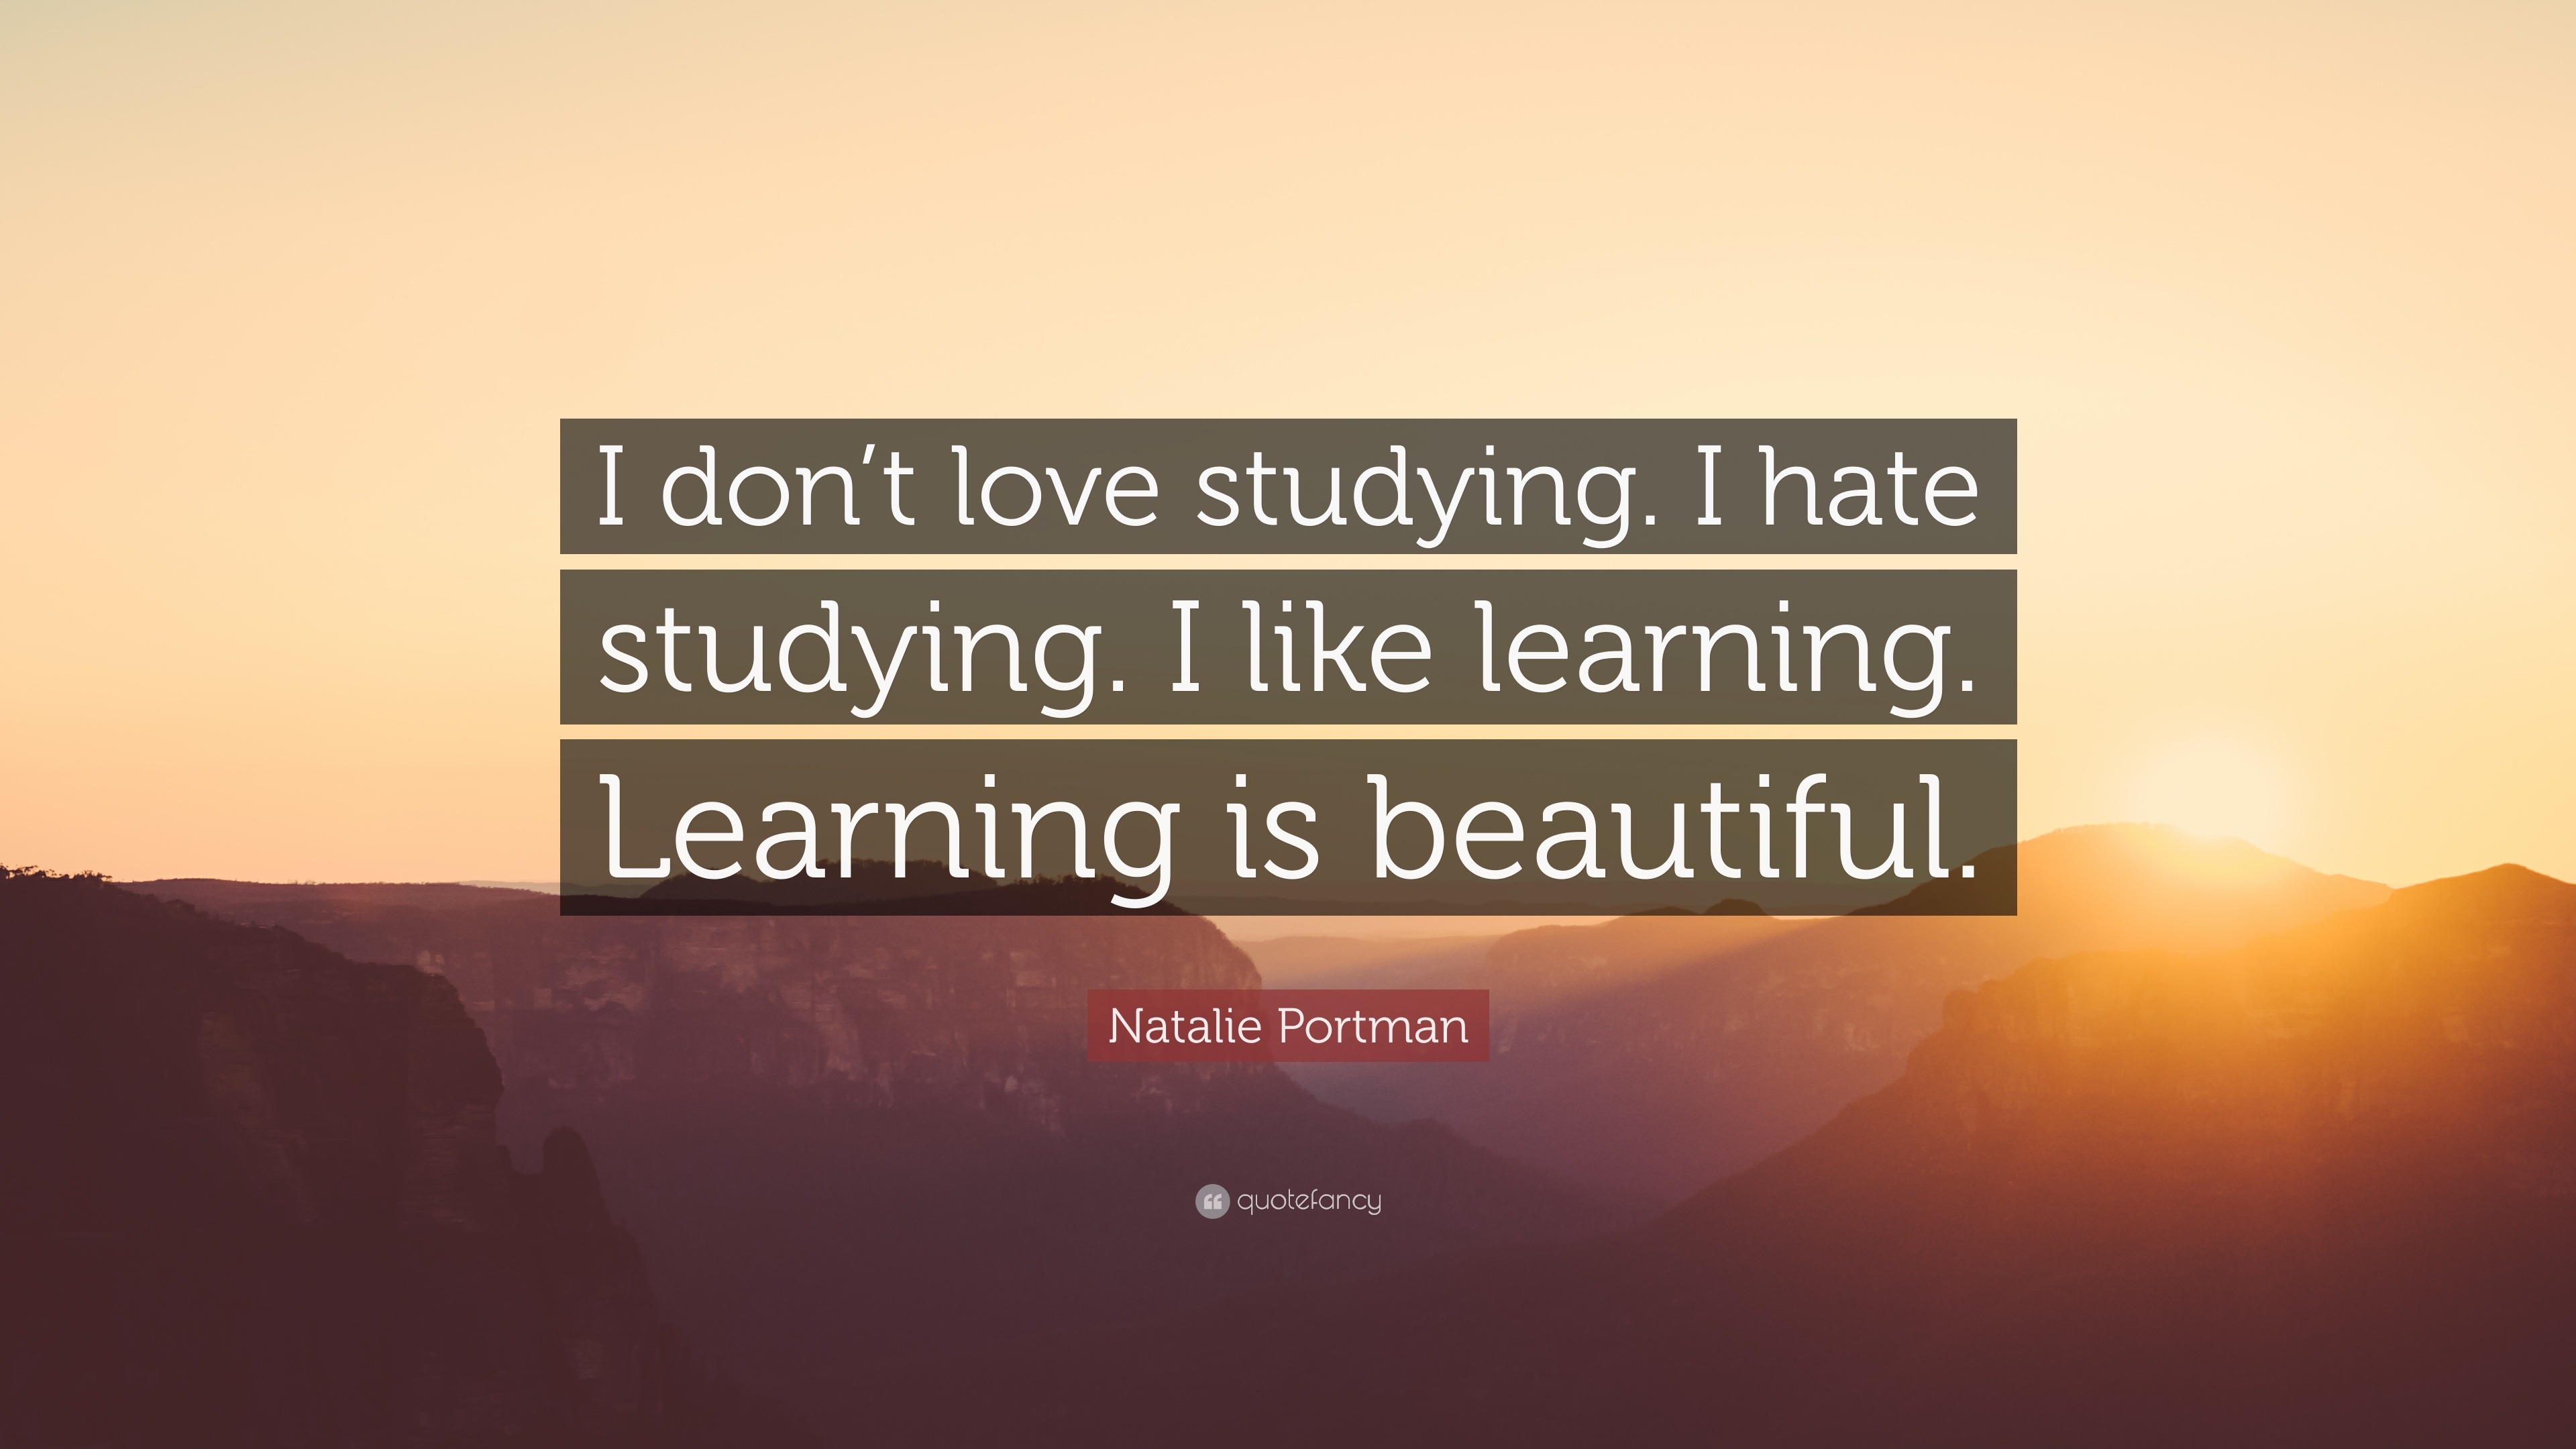 Natalie Portman Quote “I don t love studying I hate studying